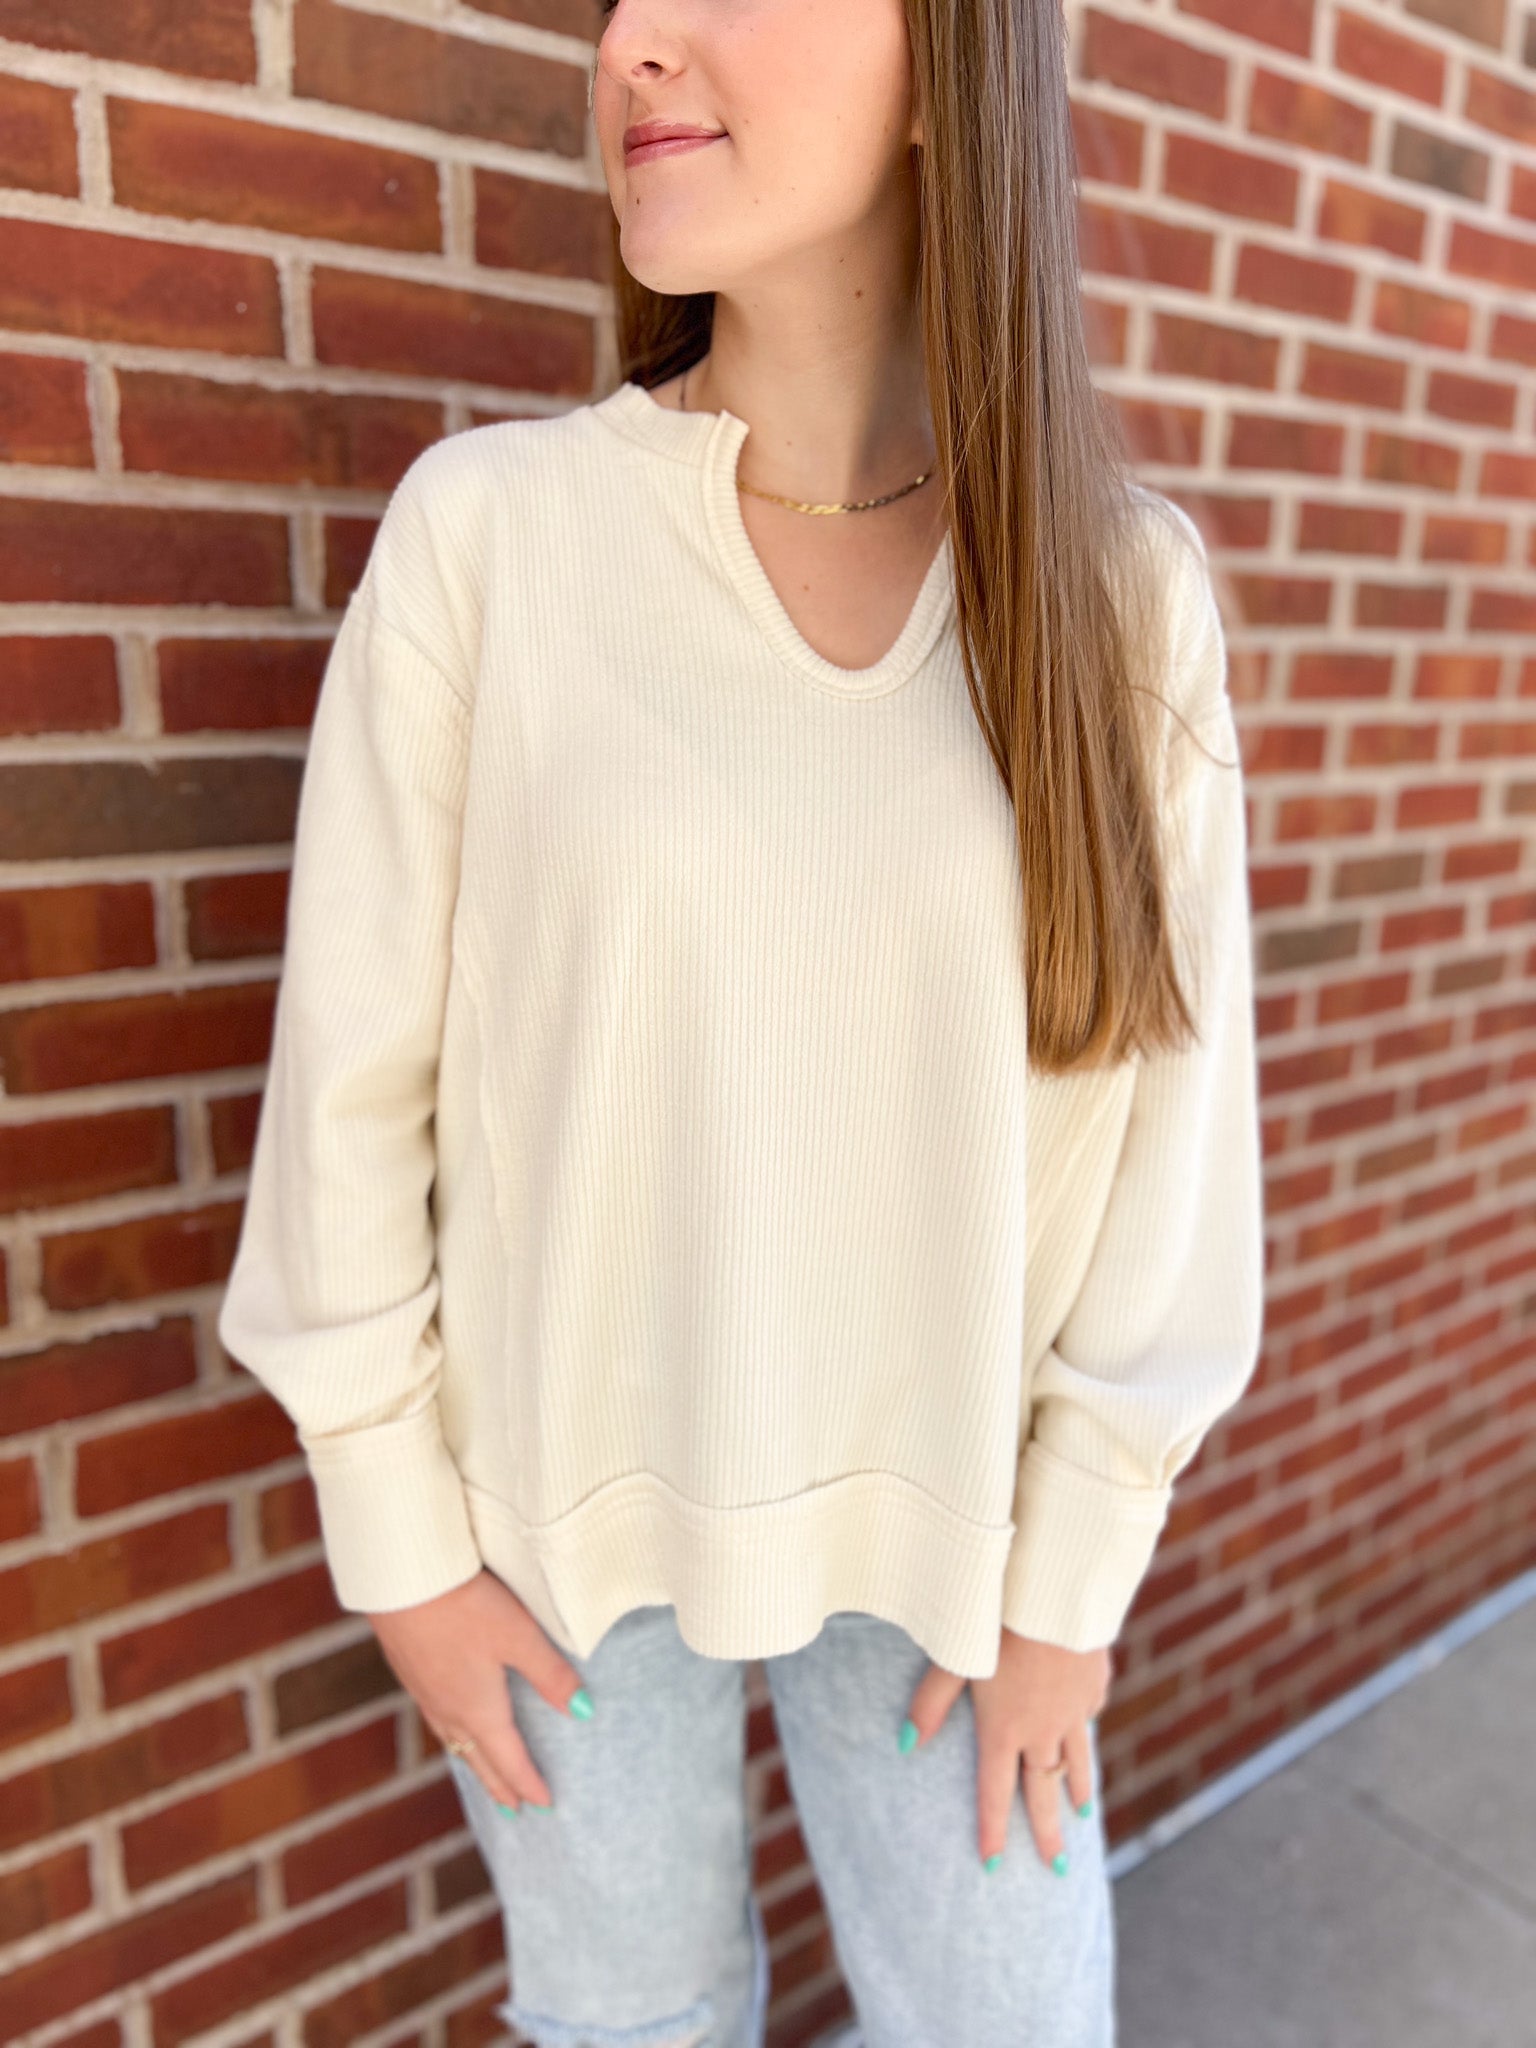 Front View of the Never Better Long Sleeve Top by Daisy Mercantile.